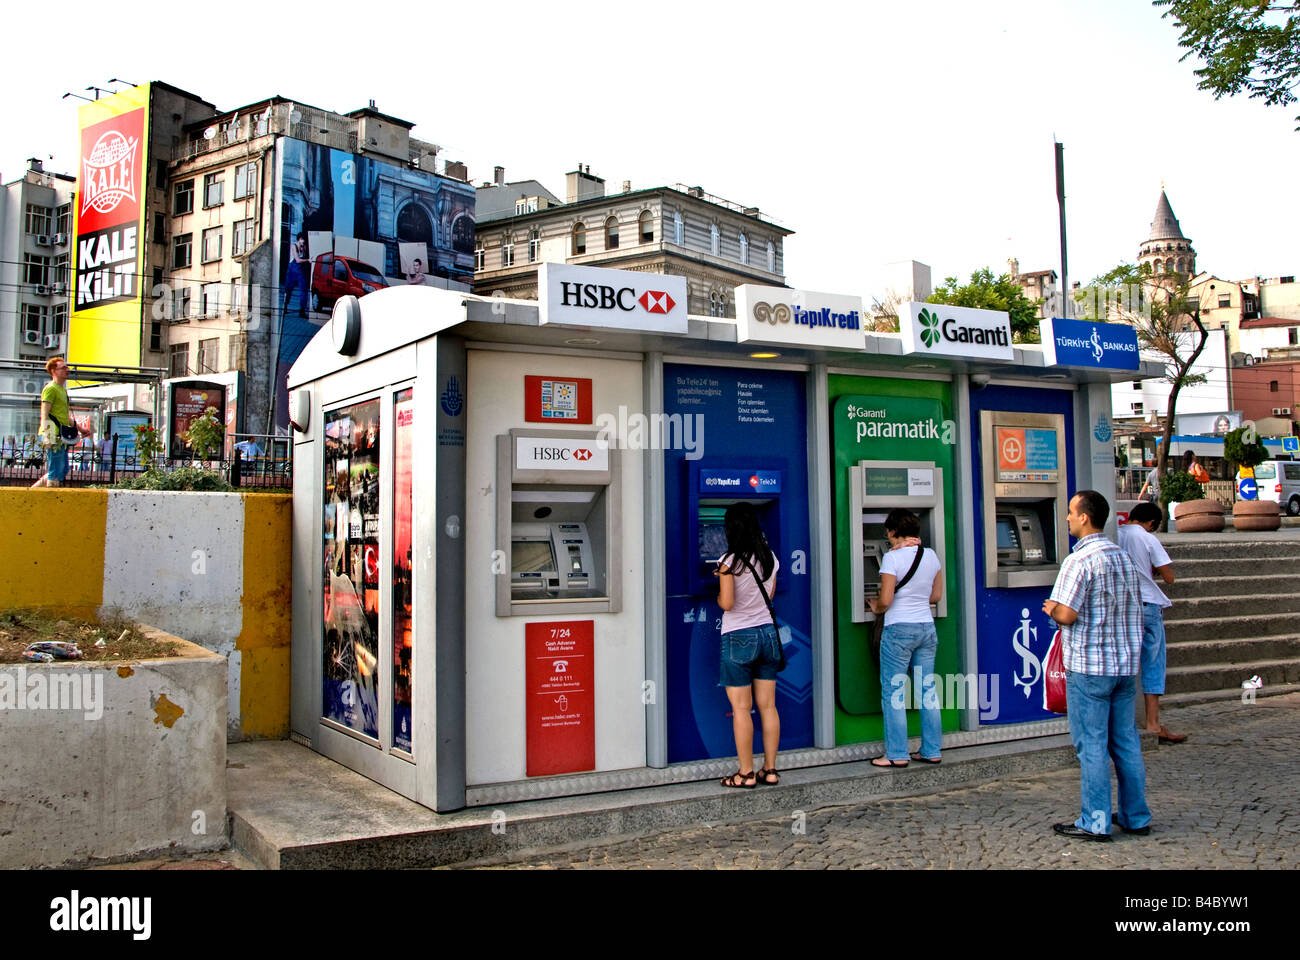 Galata Tower Istanbul Bank cash credit card machine cashpoint atm  banking payment withdrawl Stock Photo